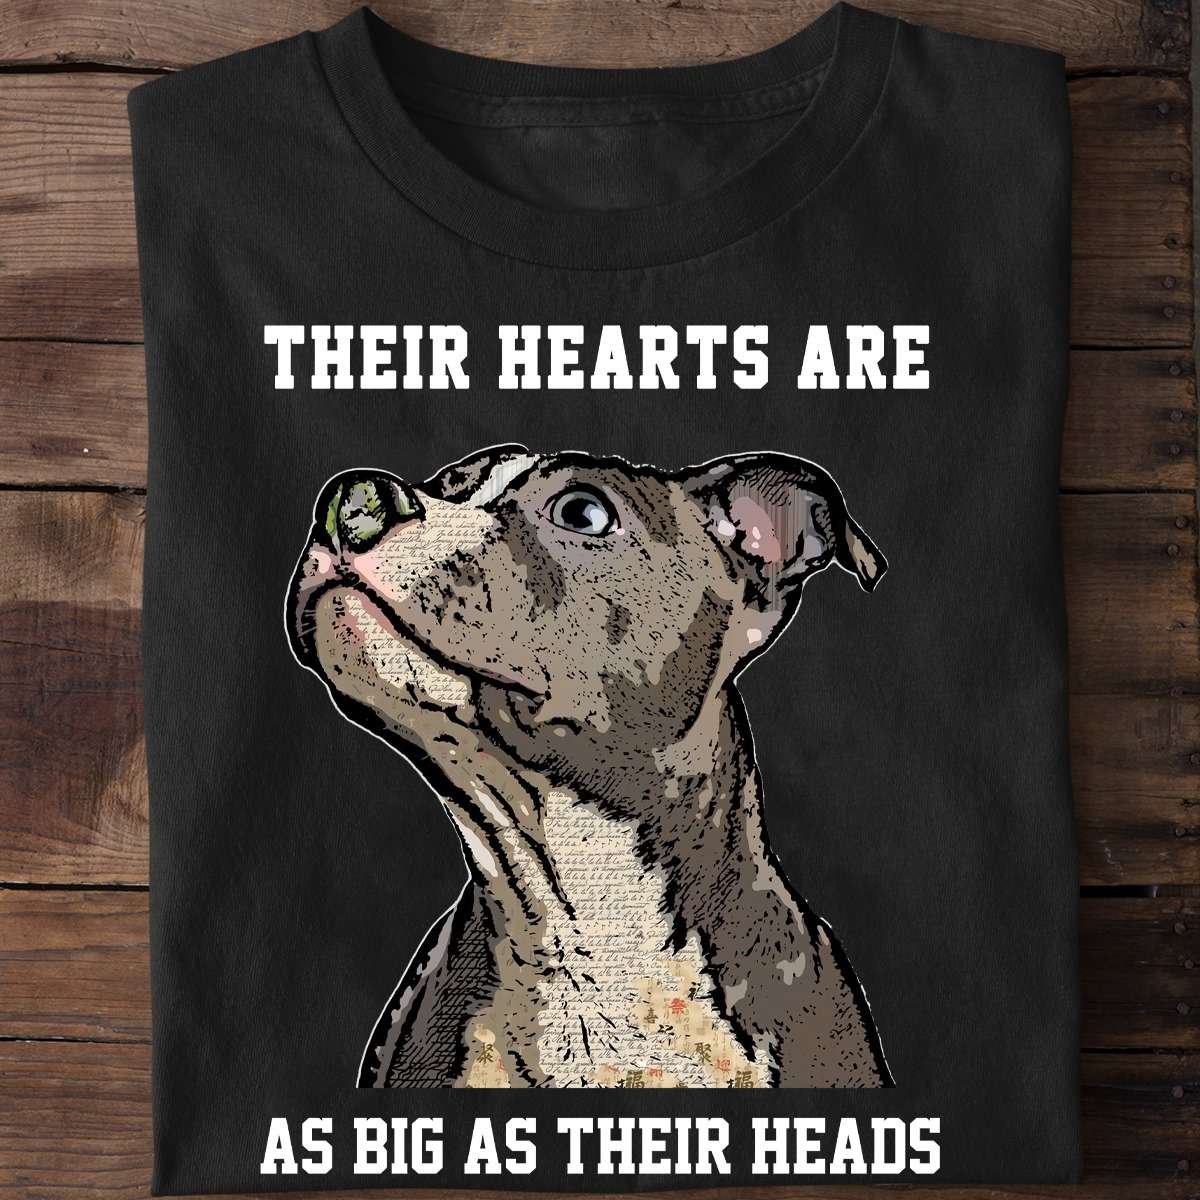 Their hearts are as big as their heads - Pitbull big heart, gift for Pitbull lover